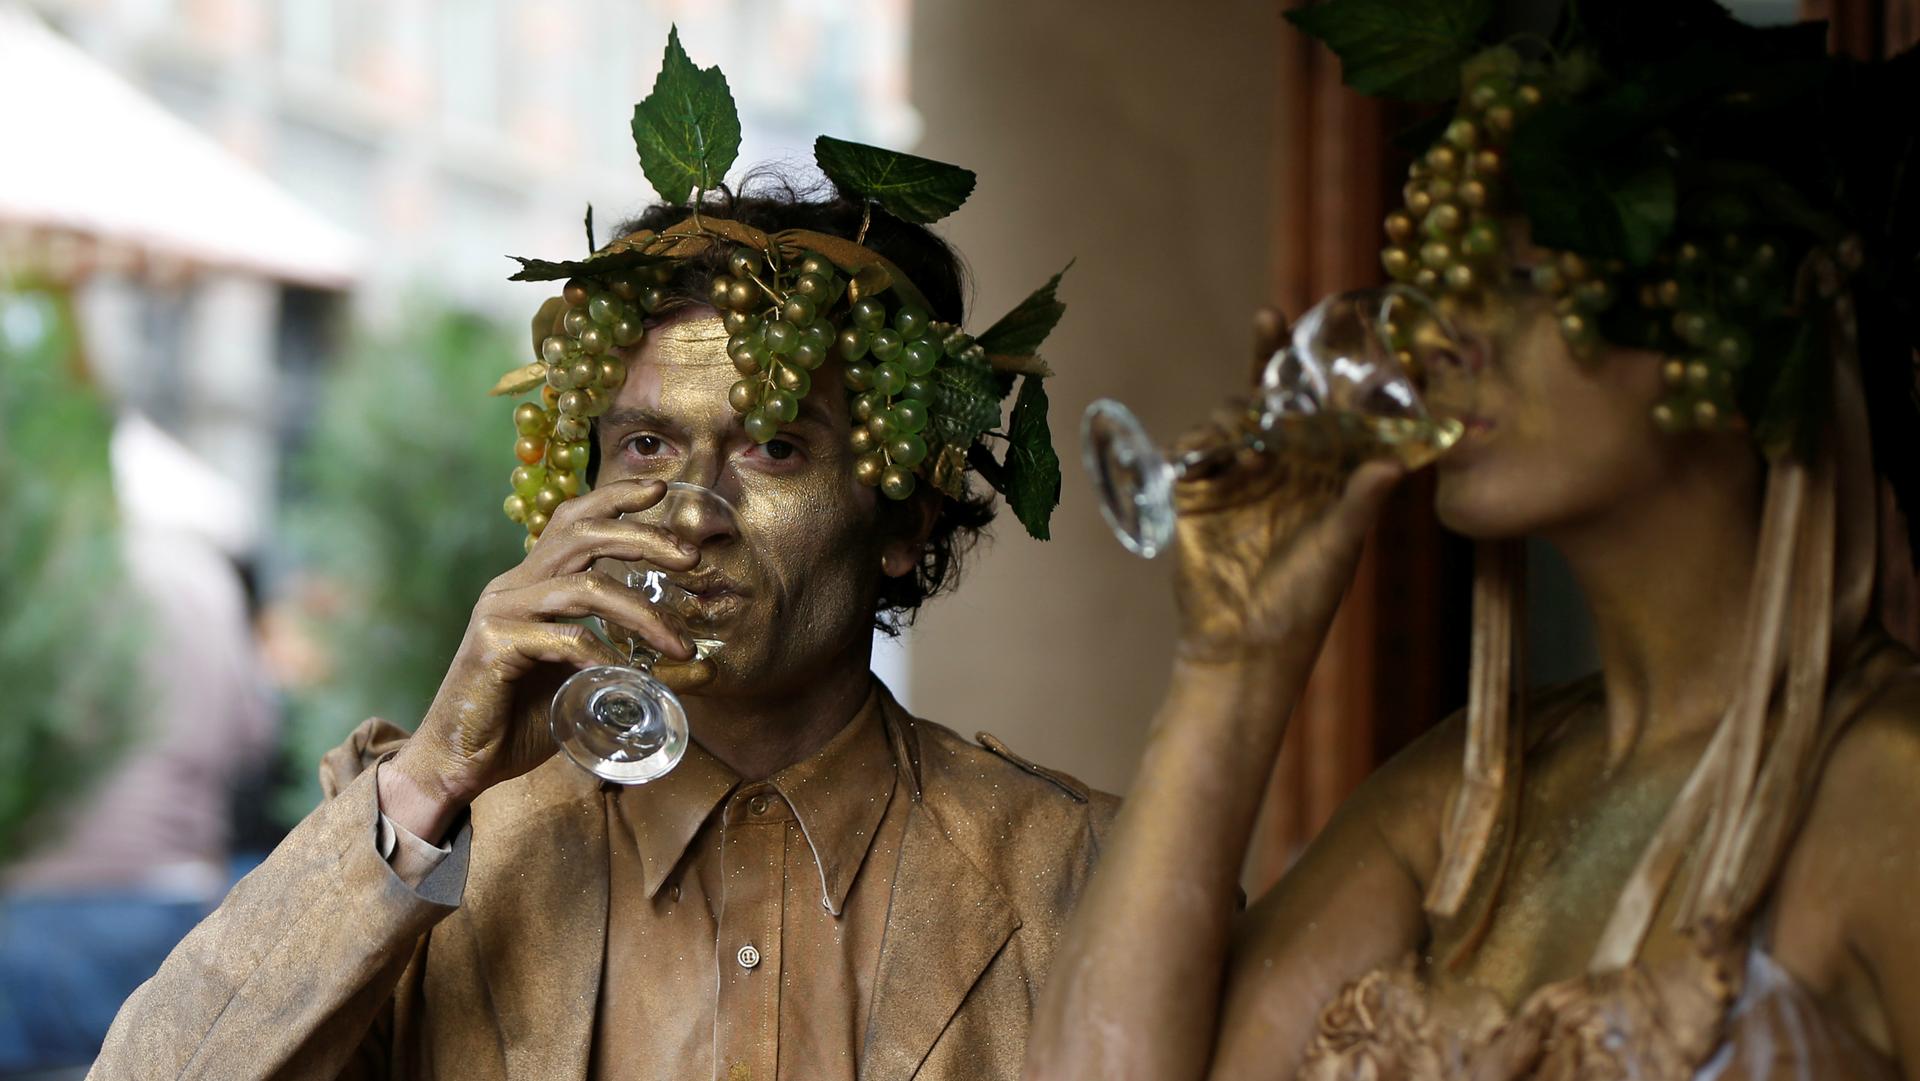 Performers drink wine during a wine festival in Tbilisi, Georgia, Oct. 15, 2017.